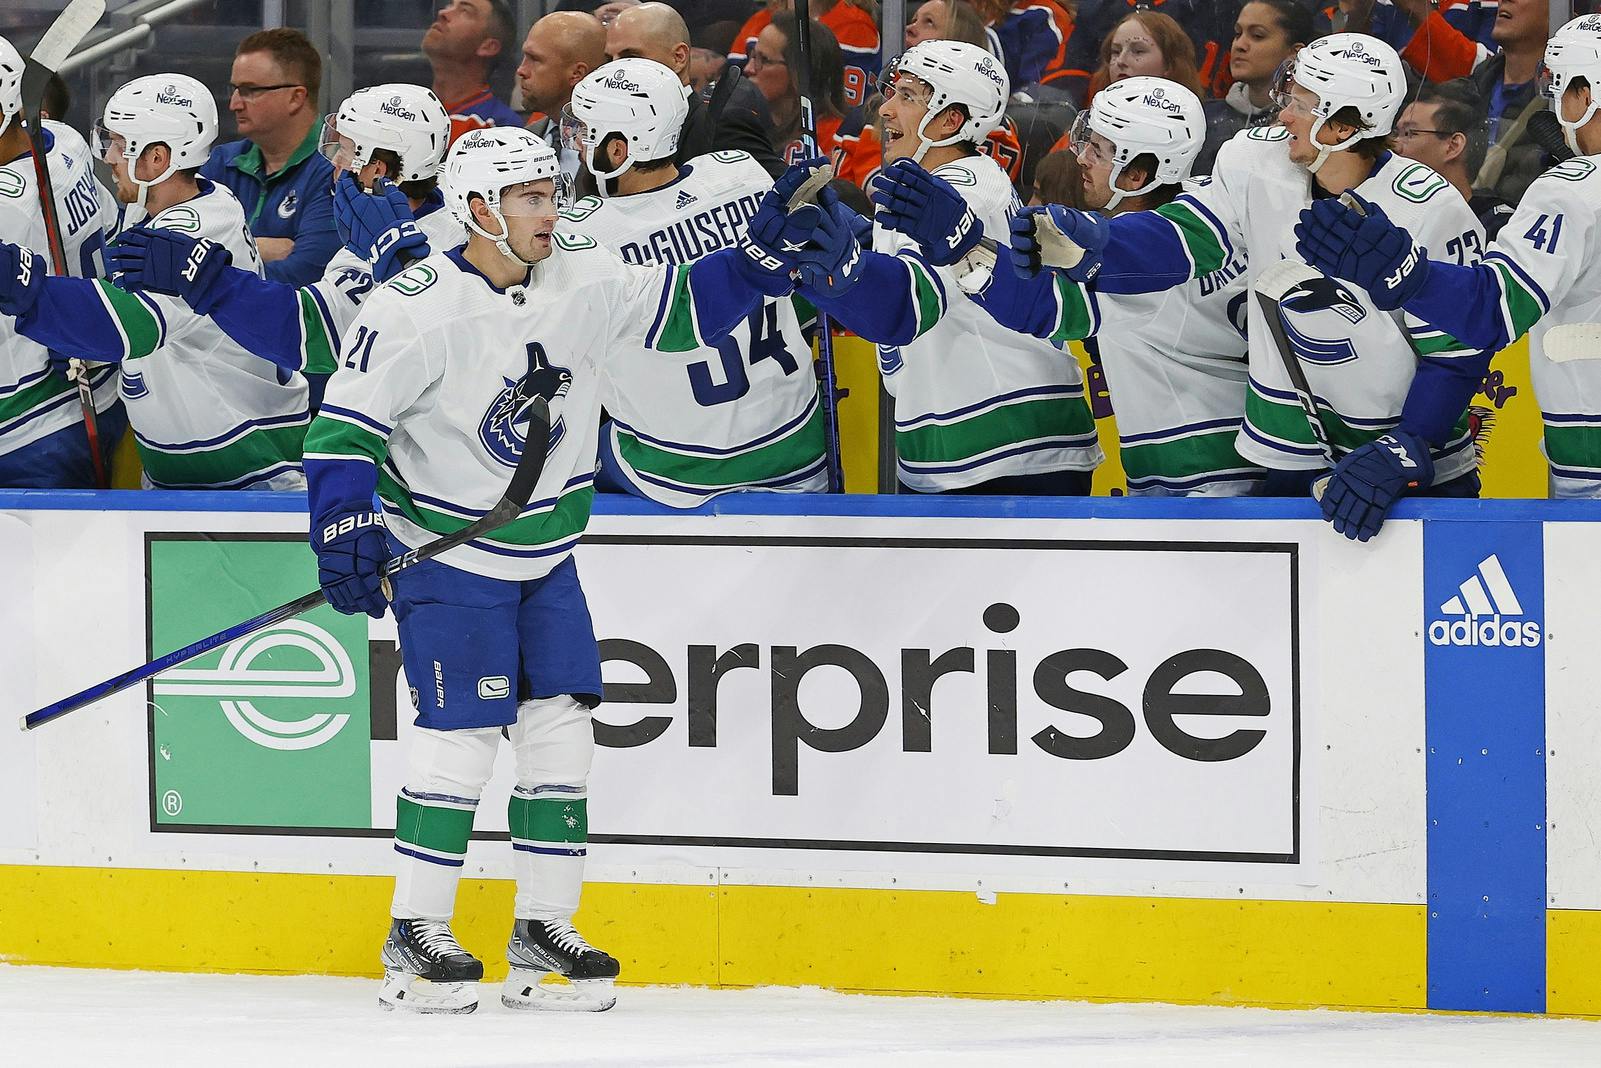 Get Excited for the Vancouver Canucks' 2023/24 NHL Season - Inside